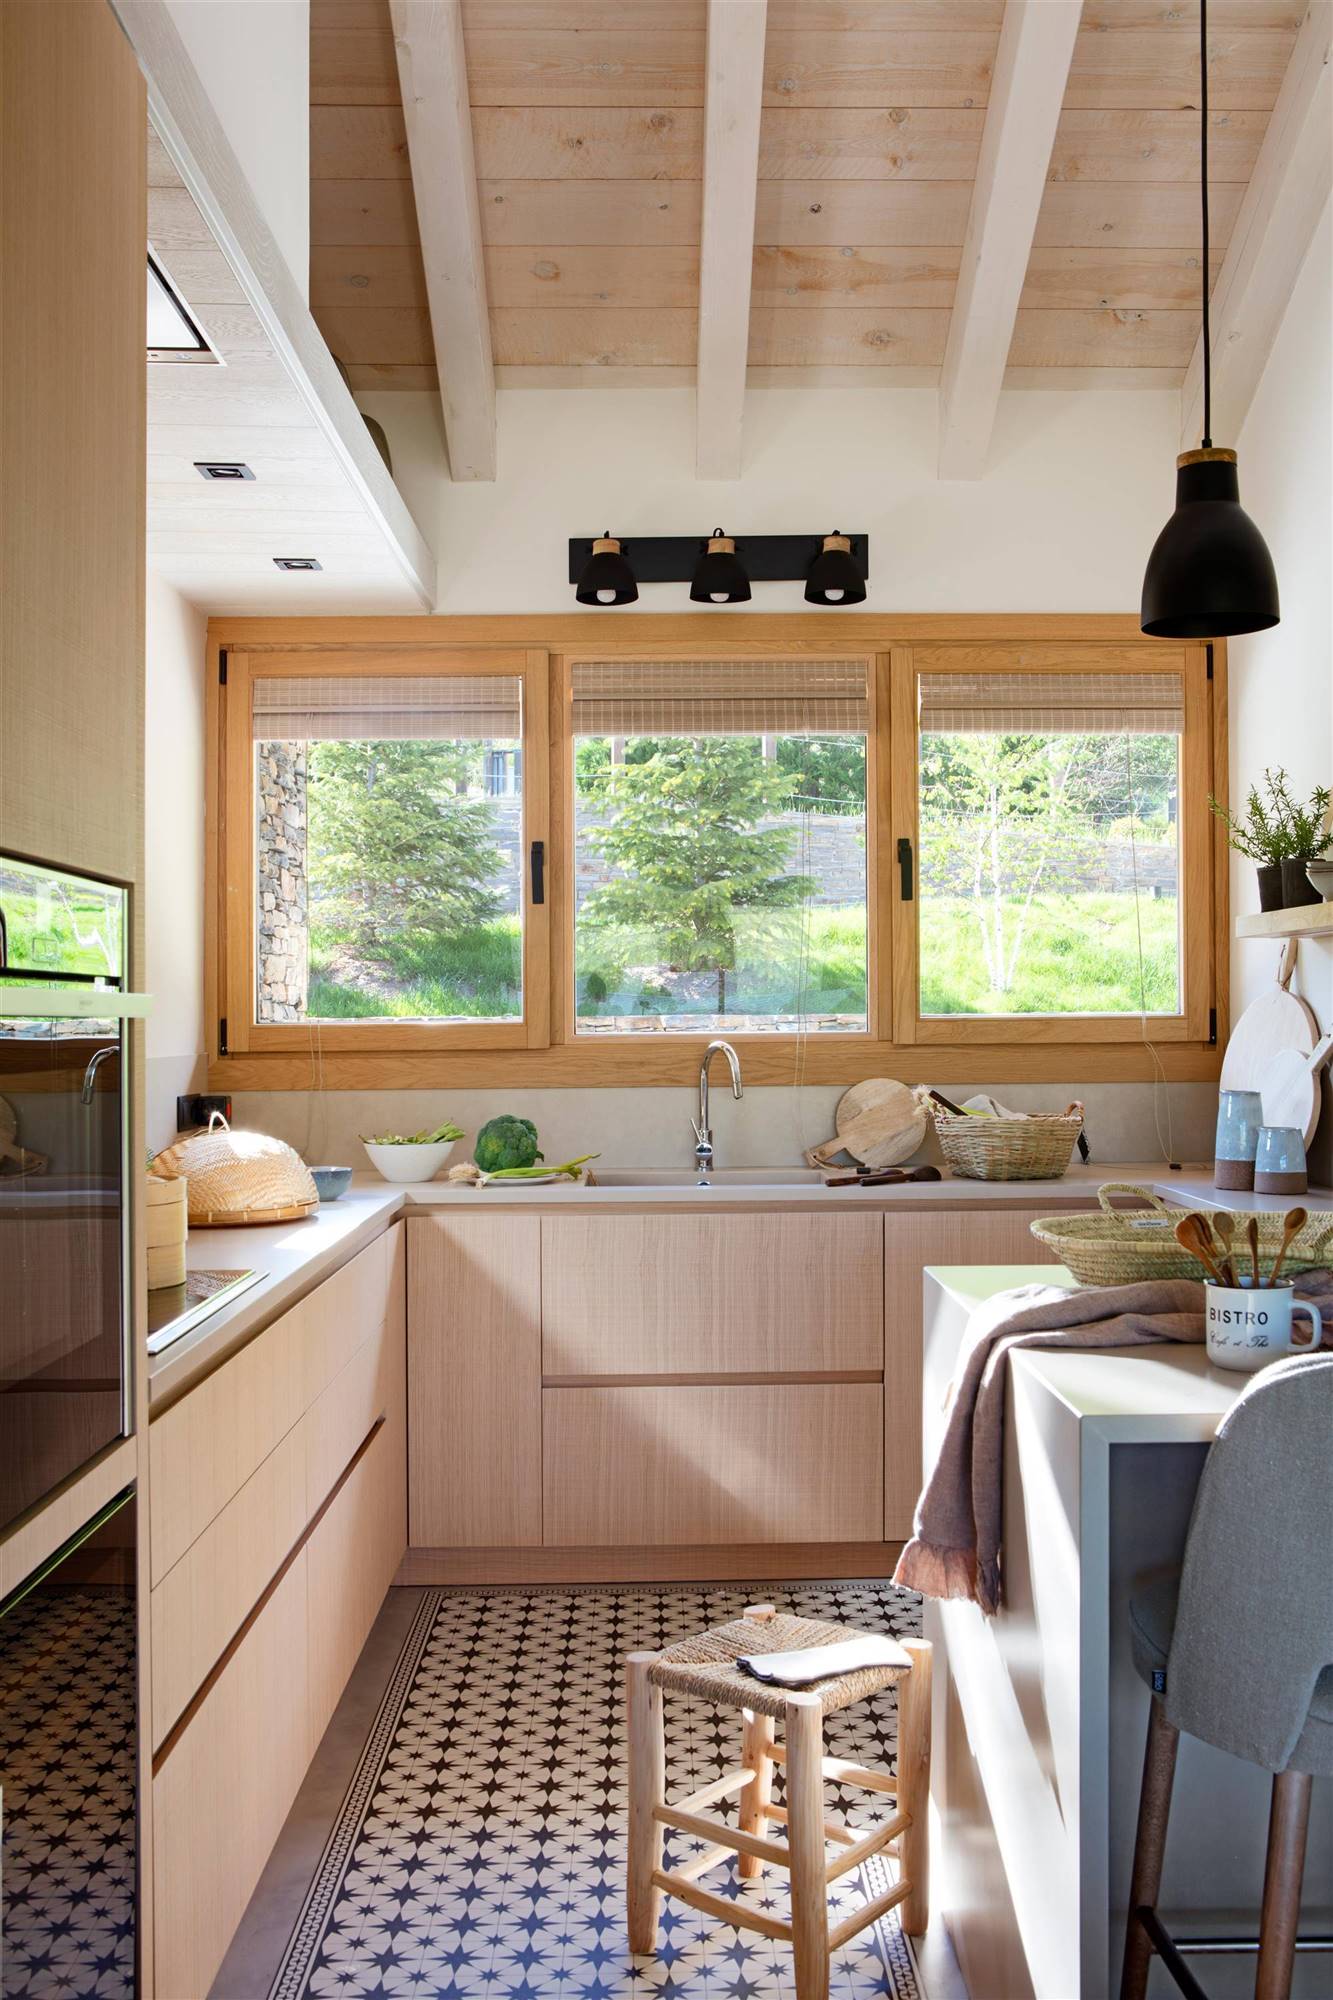 Small kitchen with modern rustic summer.